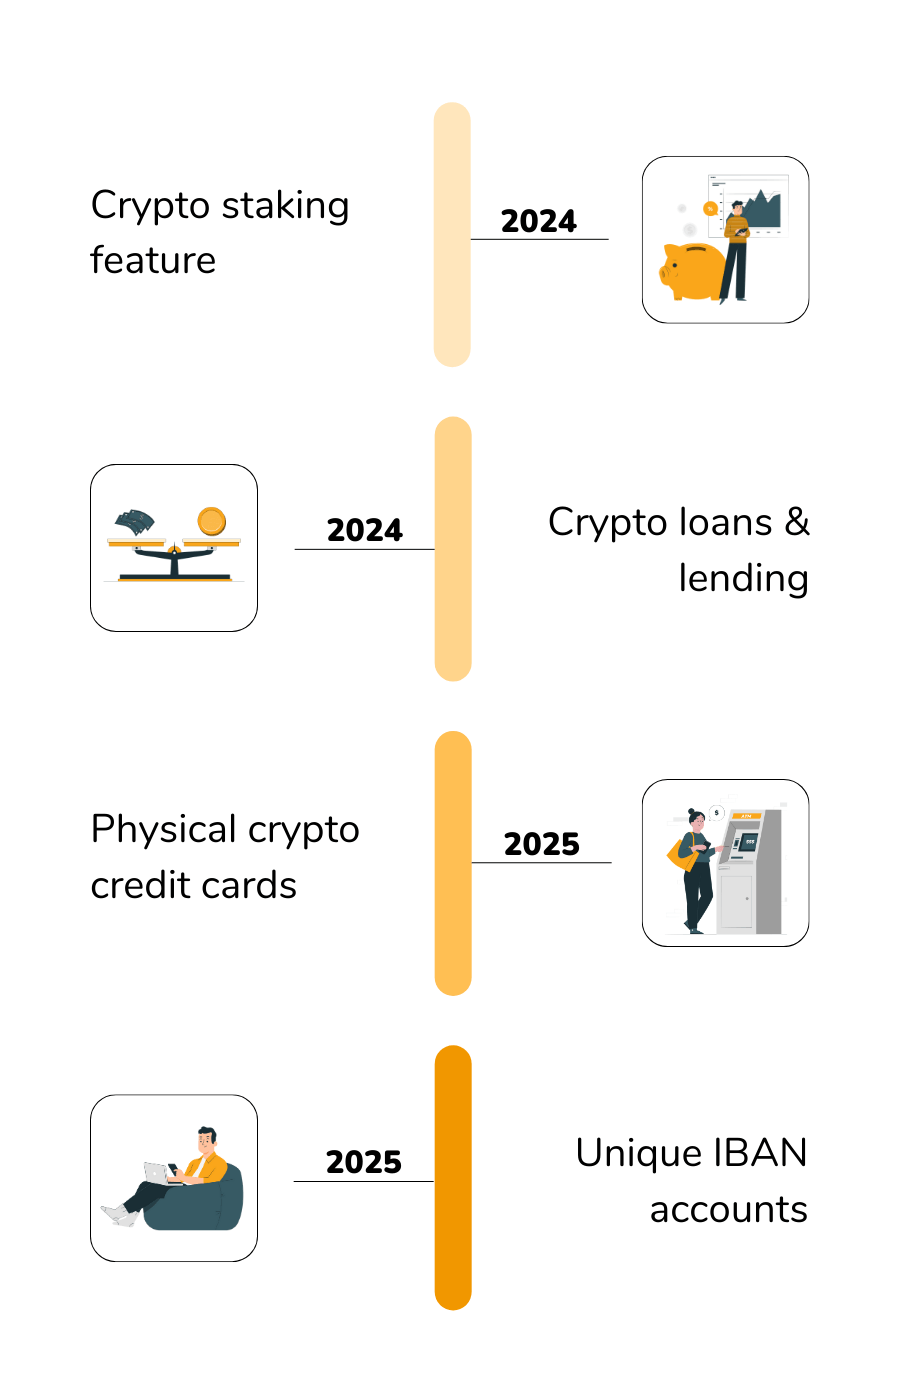 The infographic show the crypto and fiat services for buying, selling, and storing cryptocurrencies.